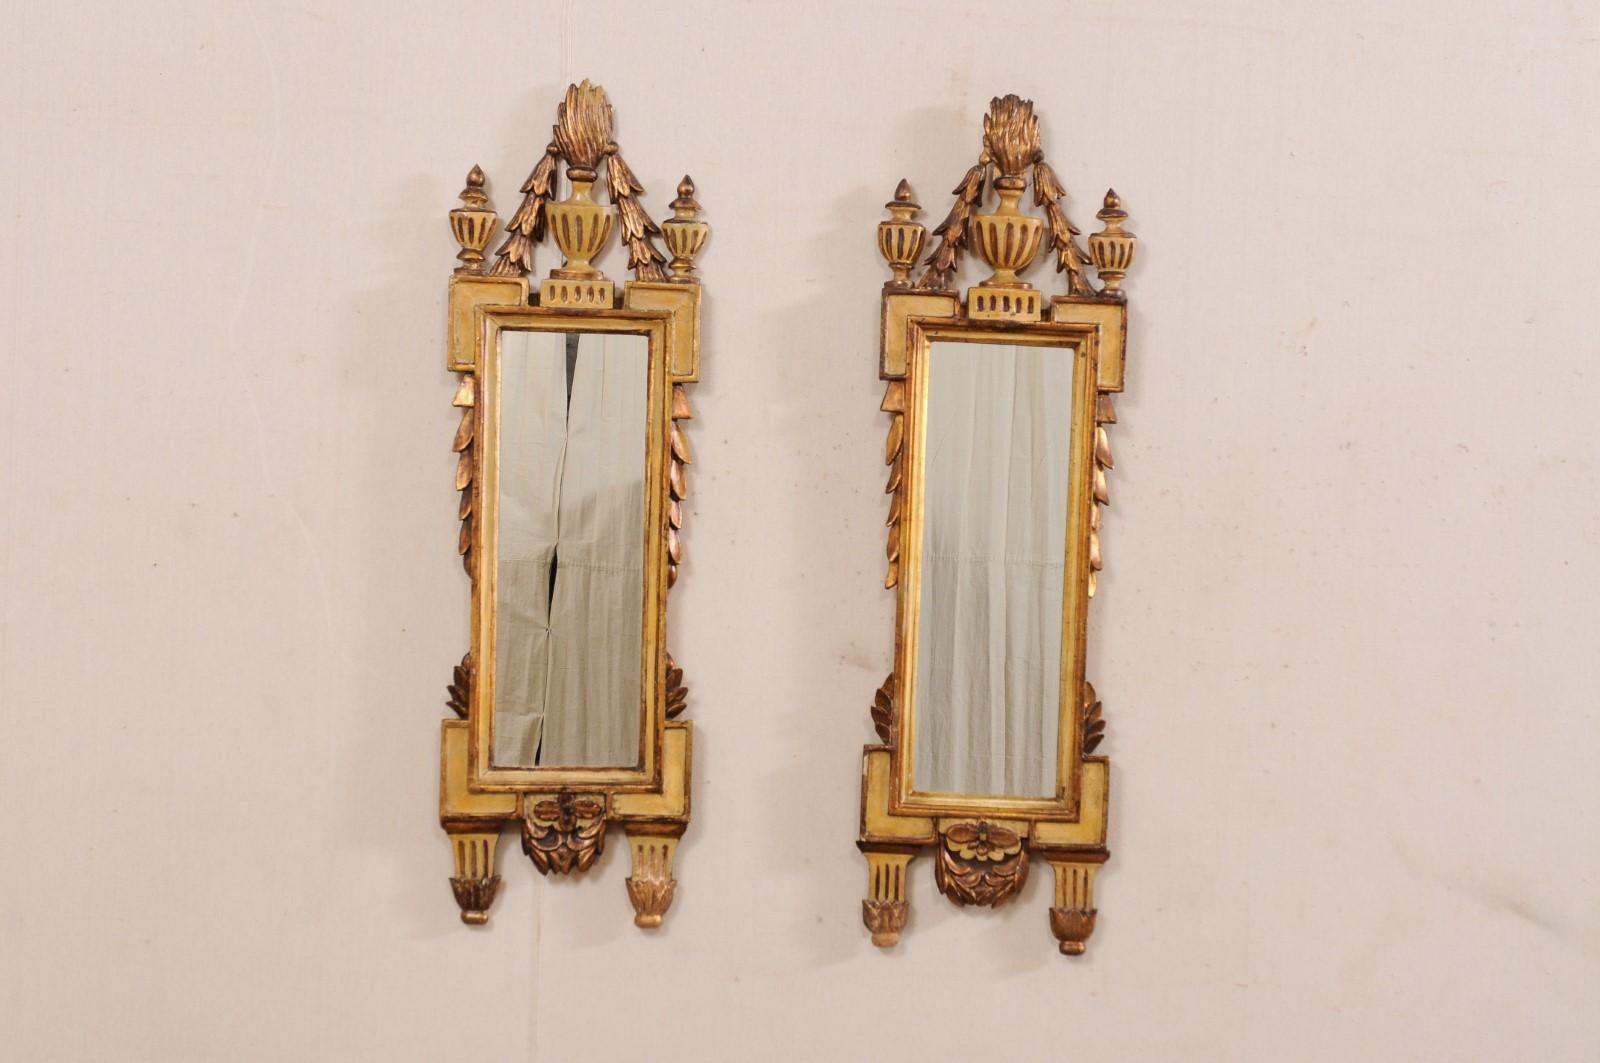 An Italian pair of Neoclassical wall mirrors from the 19th century. These antique mirrors from Italy feature Pots à Feu (Fire Urn) at their crest peaks with swagged garland draping downward to their shoulders adorn with raised finials. The mirrors